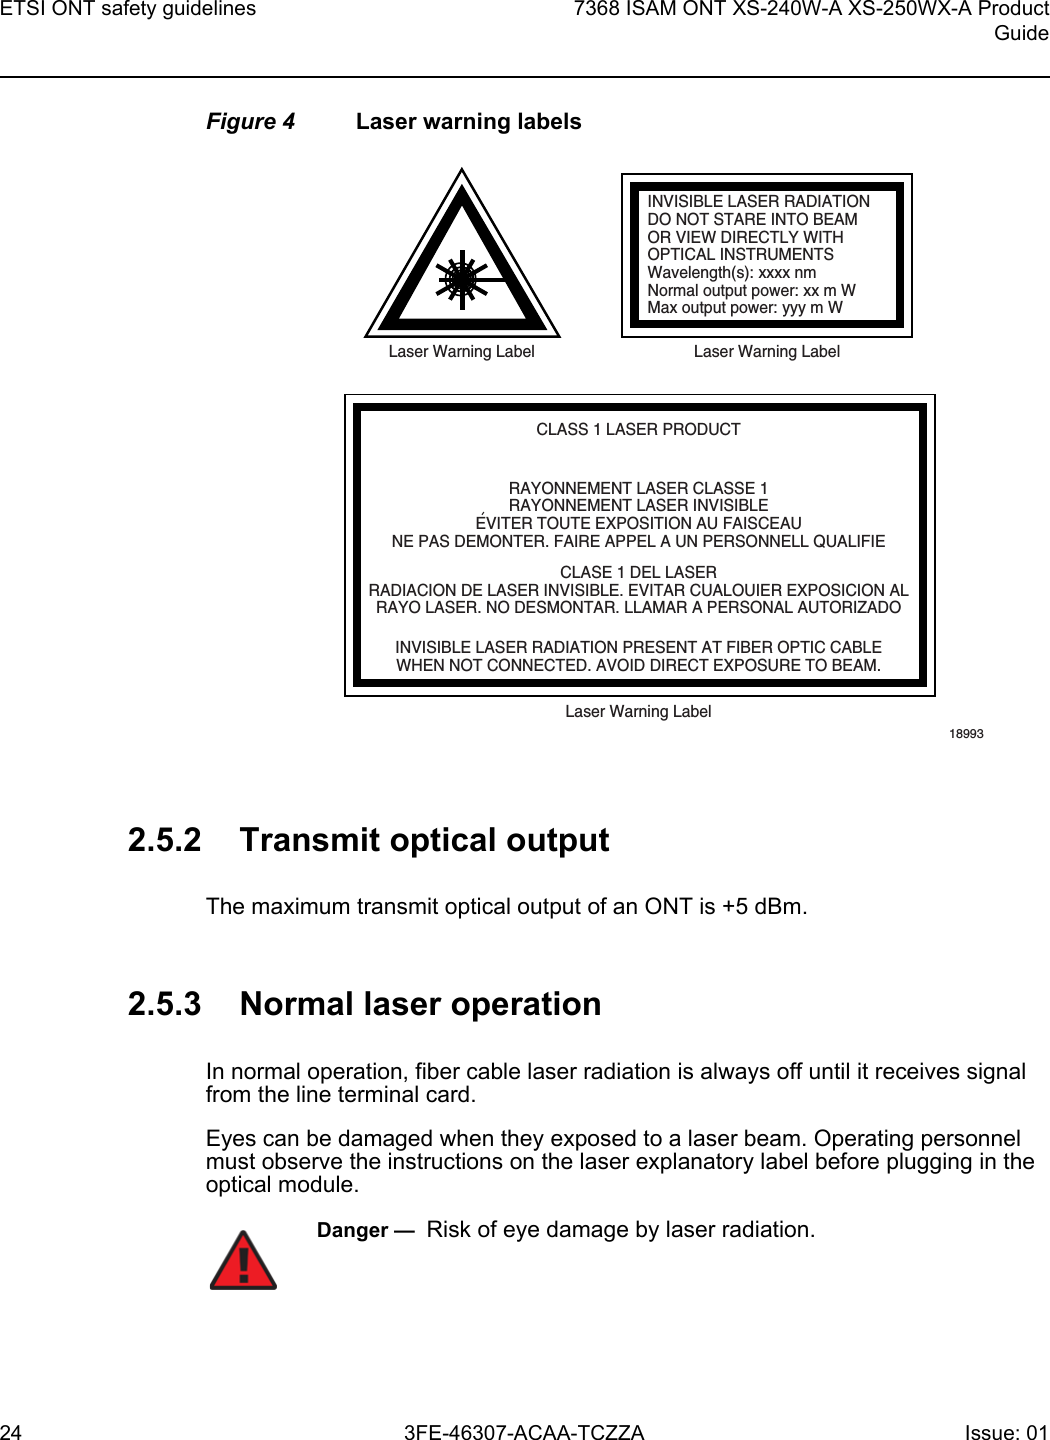 ETSI ONT safety guidelines247368 ISAM ONT XS-240W-A XS-250WX-A ProductGuide3FE-46307-ACAA-TCZZA Issue: 01 Figure 4 Laser warning labels2.5.2 Transmit optical outputThe maximum transmit optical output of an ONT is +5 dBm.2.5.3 Normal laser operationIn normal operation, fiber cable laser radiation is always off until it receives signal from the line terminal card.Eyes can be damaged when they exposed to a laser beam. Operating personnel must observe the instructions on the laser explanatory label before plugging in the optical module.INVISIBLE LASER RADIATIONDO NOT STARE INTO BEAMOR VIEW DIRECTLY WITHOPTICAL INSTRUMENTSWavelength(s): xxxx nmNormal output power: xx m WMax output power: yyy m WLaser Warning Label Laser Warning LabelCLASS 1 LASER PRODUCTINVISIBLE LASER RADIATION PRESENT AT FIBER OPTIC CABLEWHEN NOT CONNECTED. AVOID DIRECT EXPOSURE TO BEAM.RAYONNEMENT LASER CLASSE 1RAYONNEMENT LASER INVISIBLEEVITER TOUTE EXPOSITION AU FAISCEAUNE PAS DEMONTER. FAIRE APPEL A UN PERSONNELL QUALIFIECLASE 1 DEL LASERRADIACION DE LASER INVISIBLE. EVITAR CUALOUIER EXPOSICION ALRAYO LASER. NO DESMONTAR. LLAMAR A PERSONAL AUTORIZADOLaser Warning Label18993&apos;Danger —  Risk of eye damage by laser radiation.